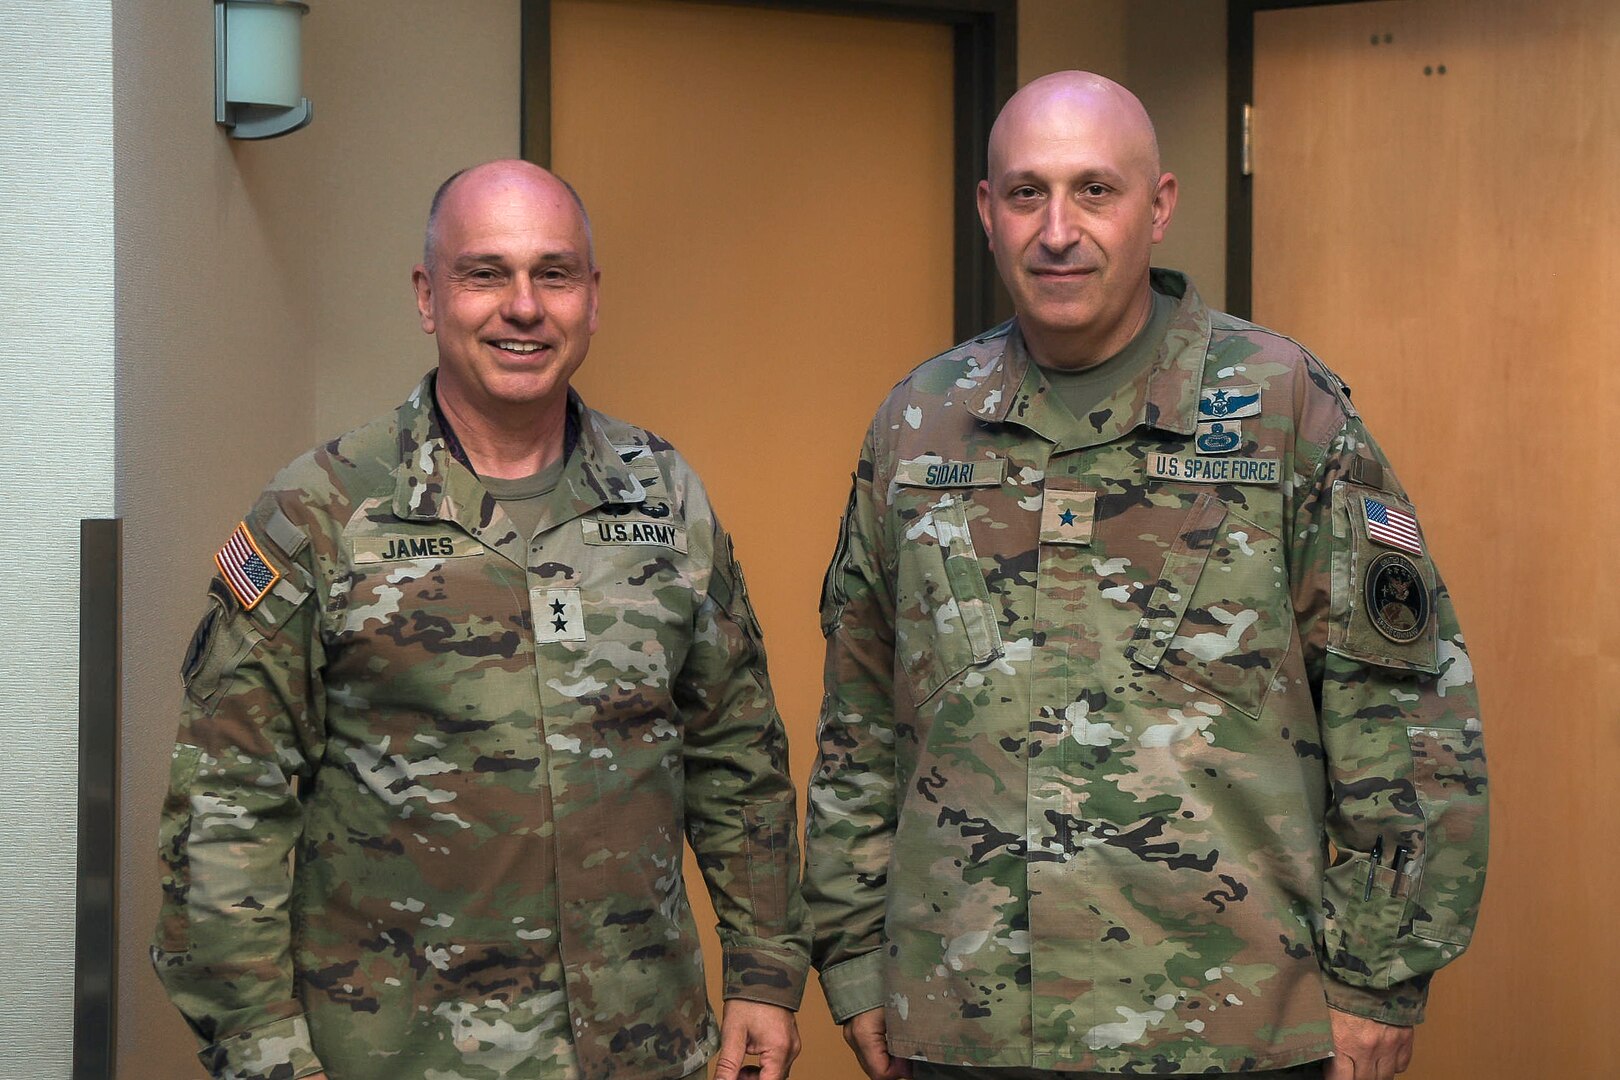 Two men in military uniforms stand next to each other and pose for a photo